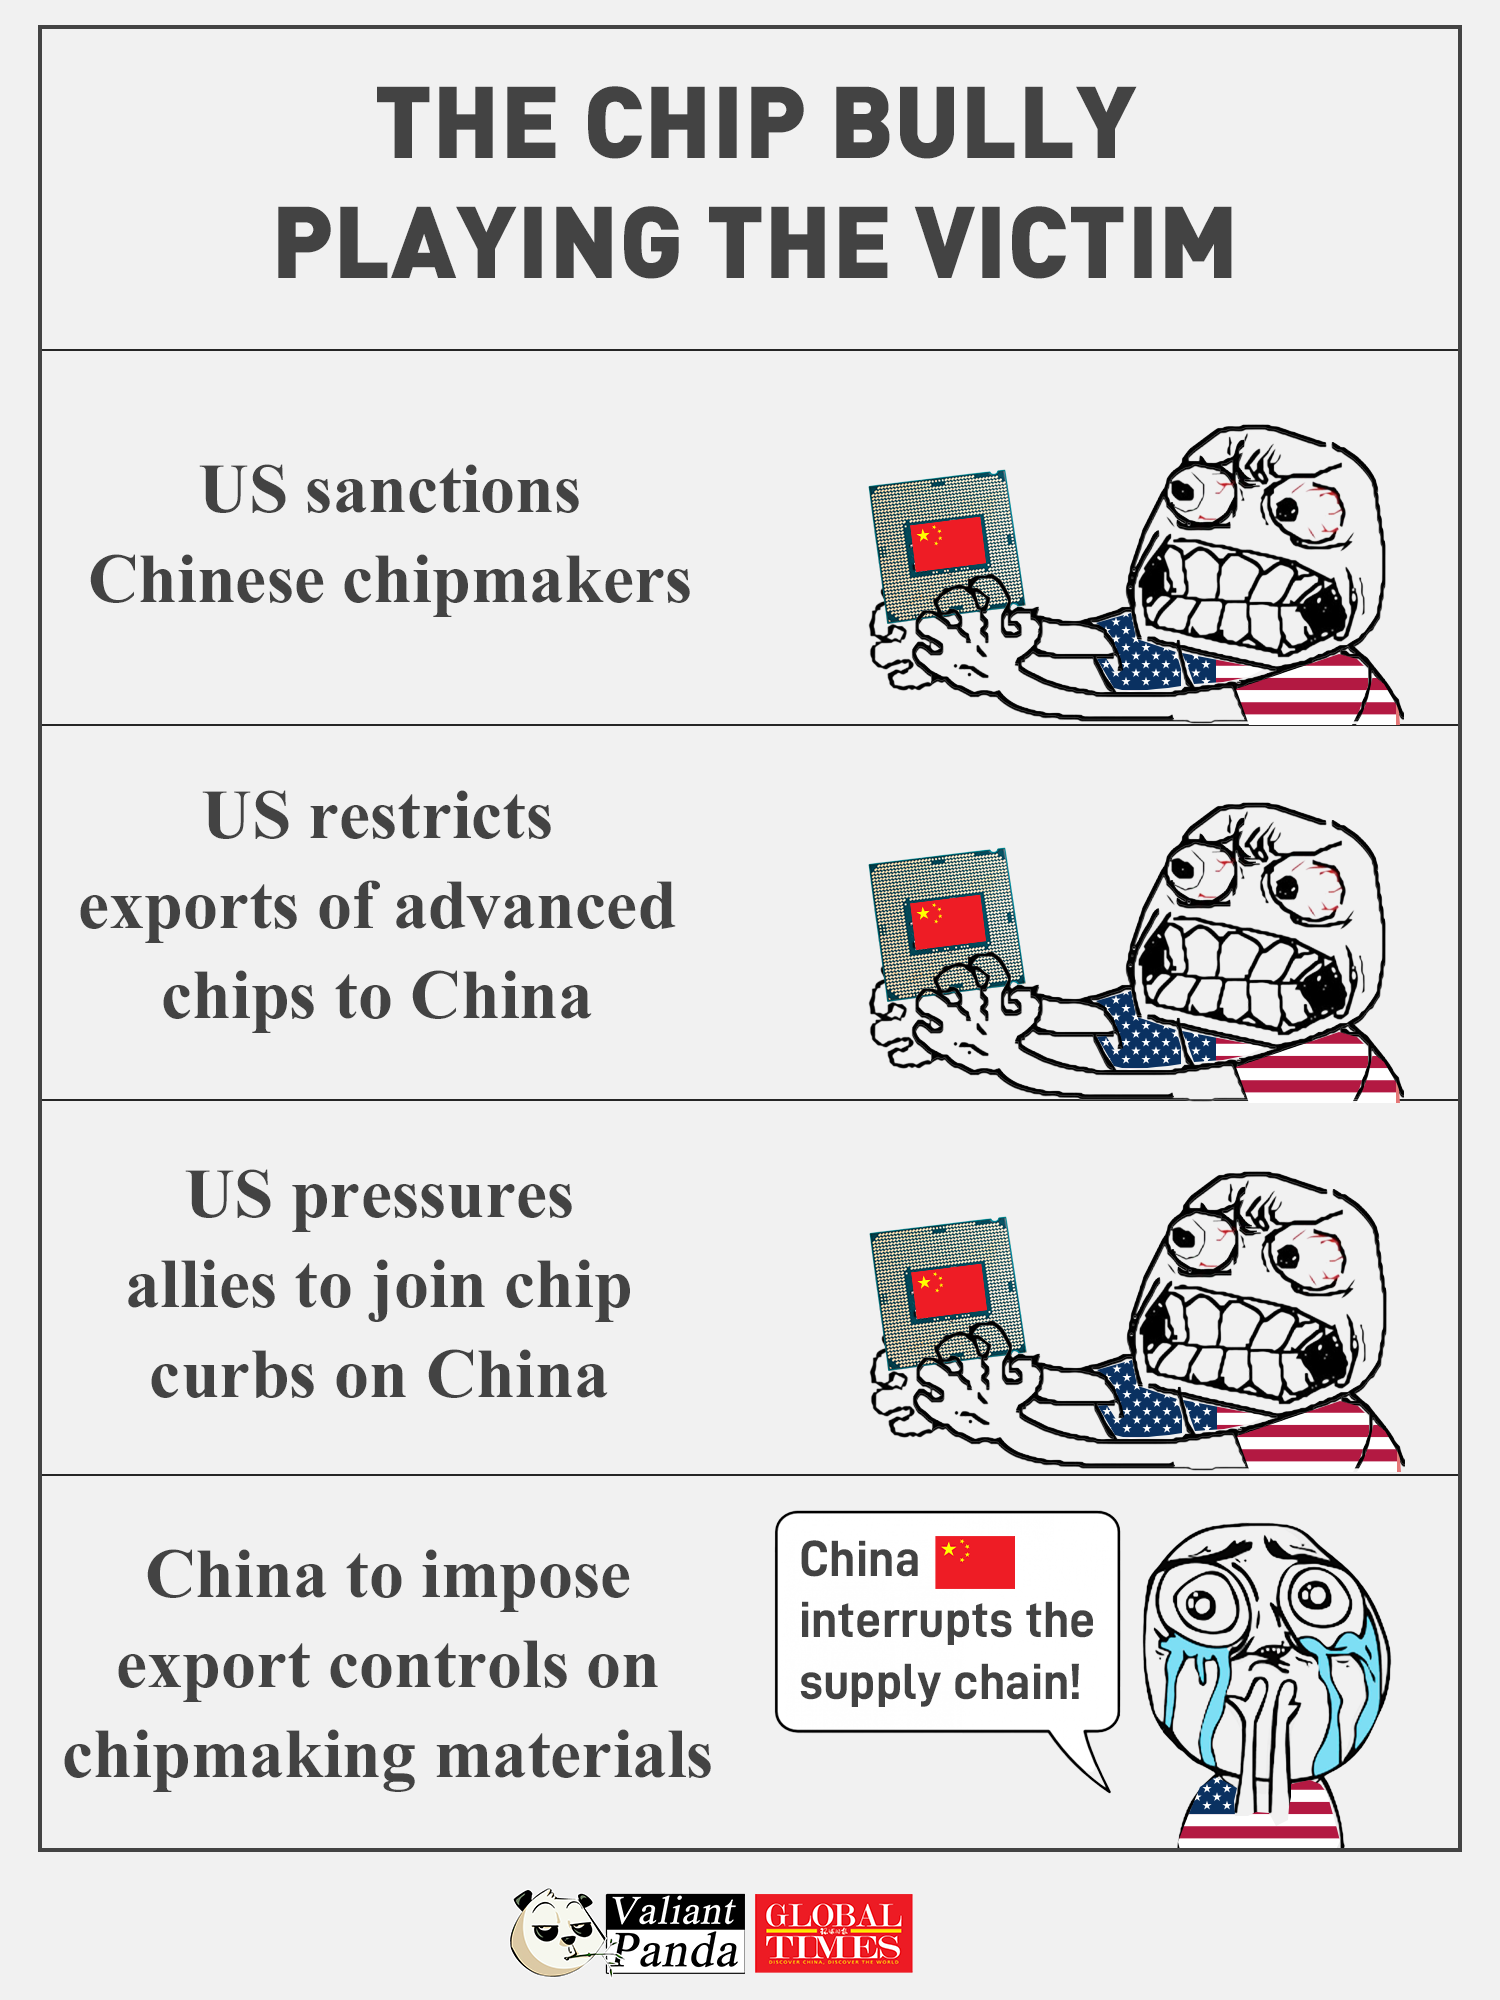 China imposes export controls on chipmaking materials, gallium and germanium, and suddenly the US plays the victim card. Graphic:GT